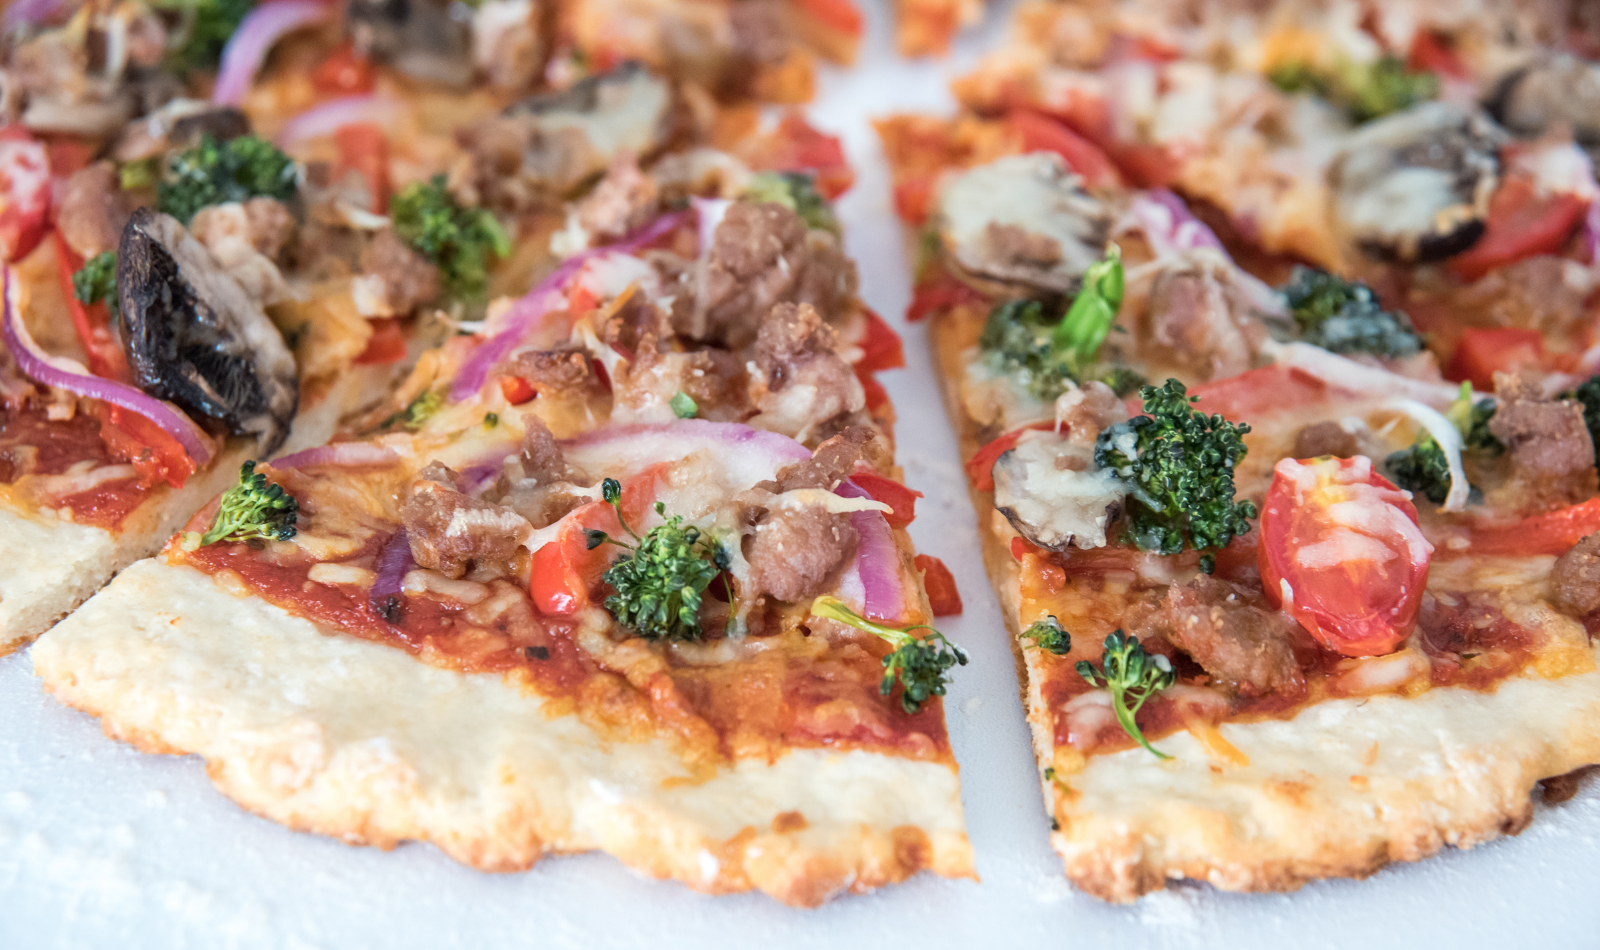 Blog Featured Image - Veggie and Sausage Pizza